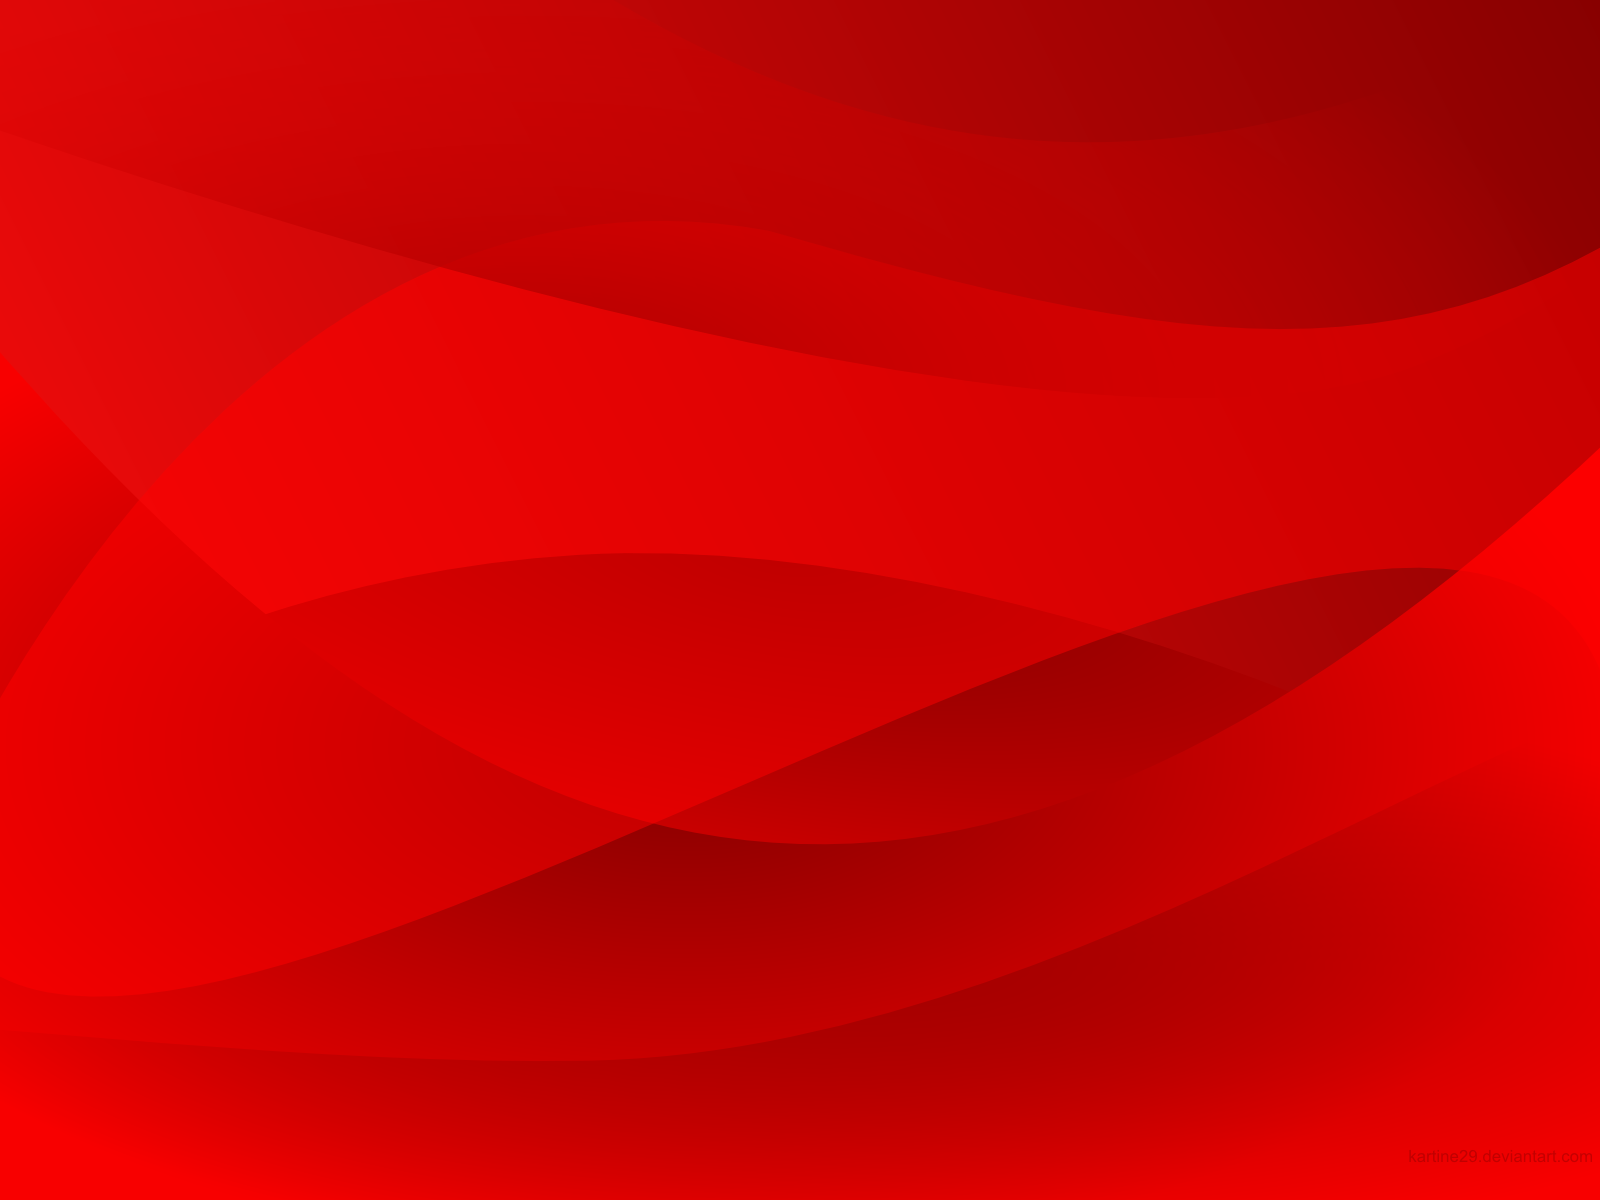 FHDQ Red backgrounds Pictures 163.5 Kb, 7-THemes Graphics